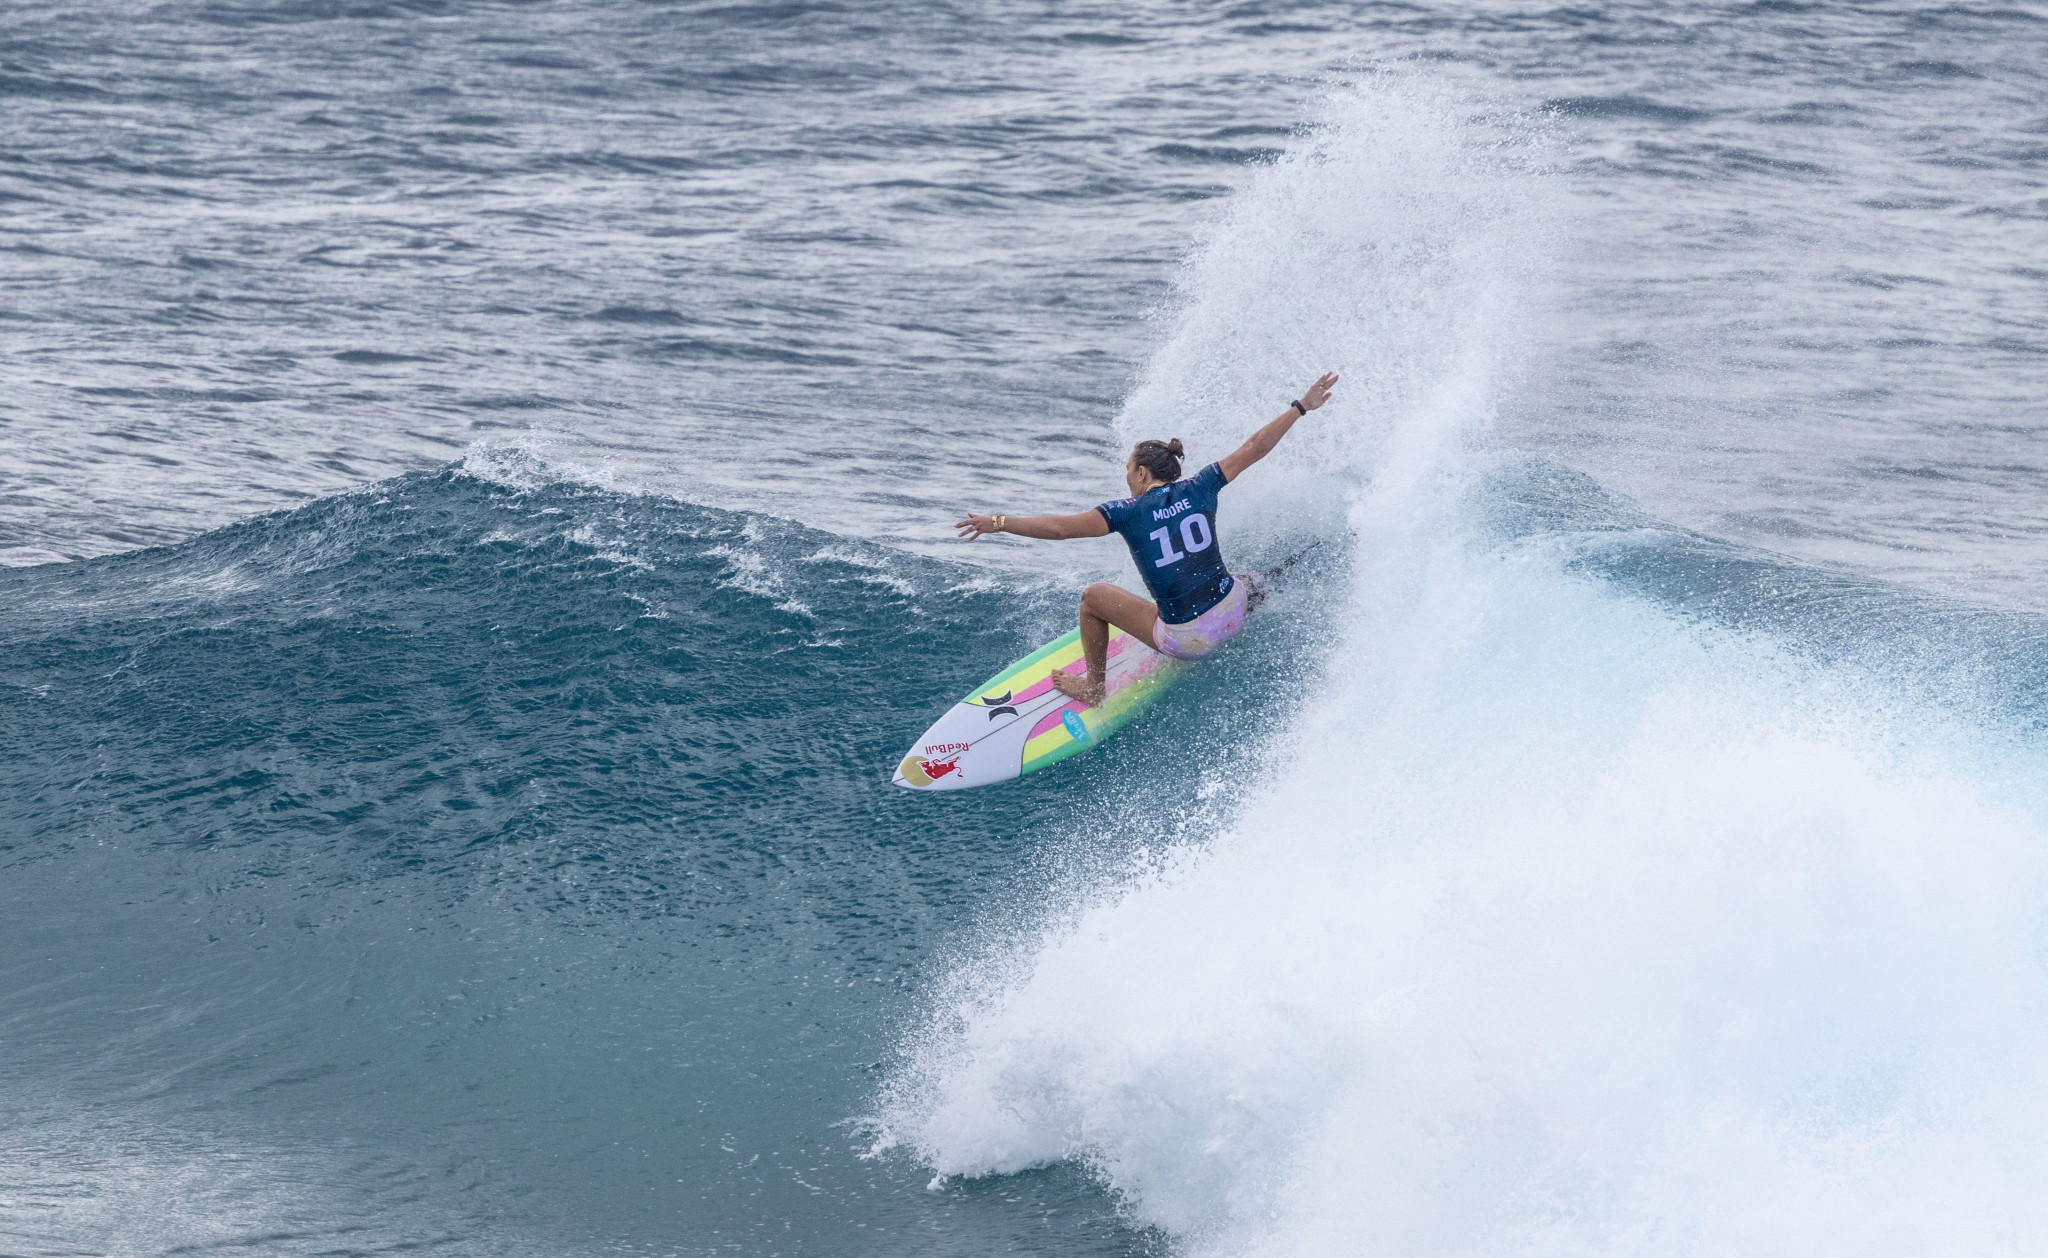 Olympic champion Carissa Moore of Hawaii won the opening WSL Championship Tour event of the season ©Getty Images